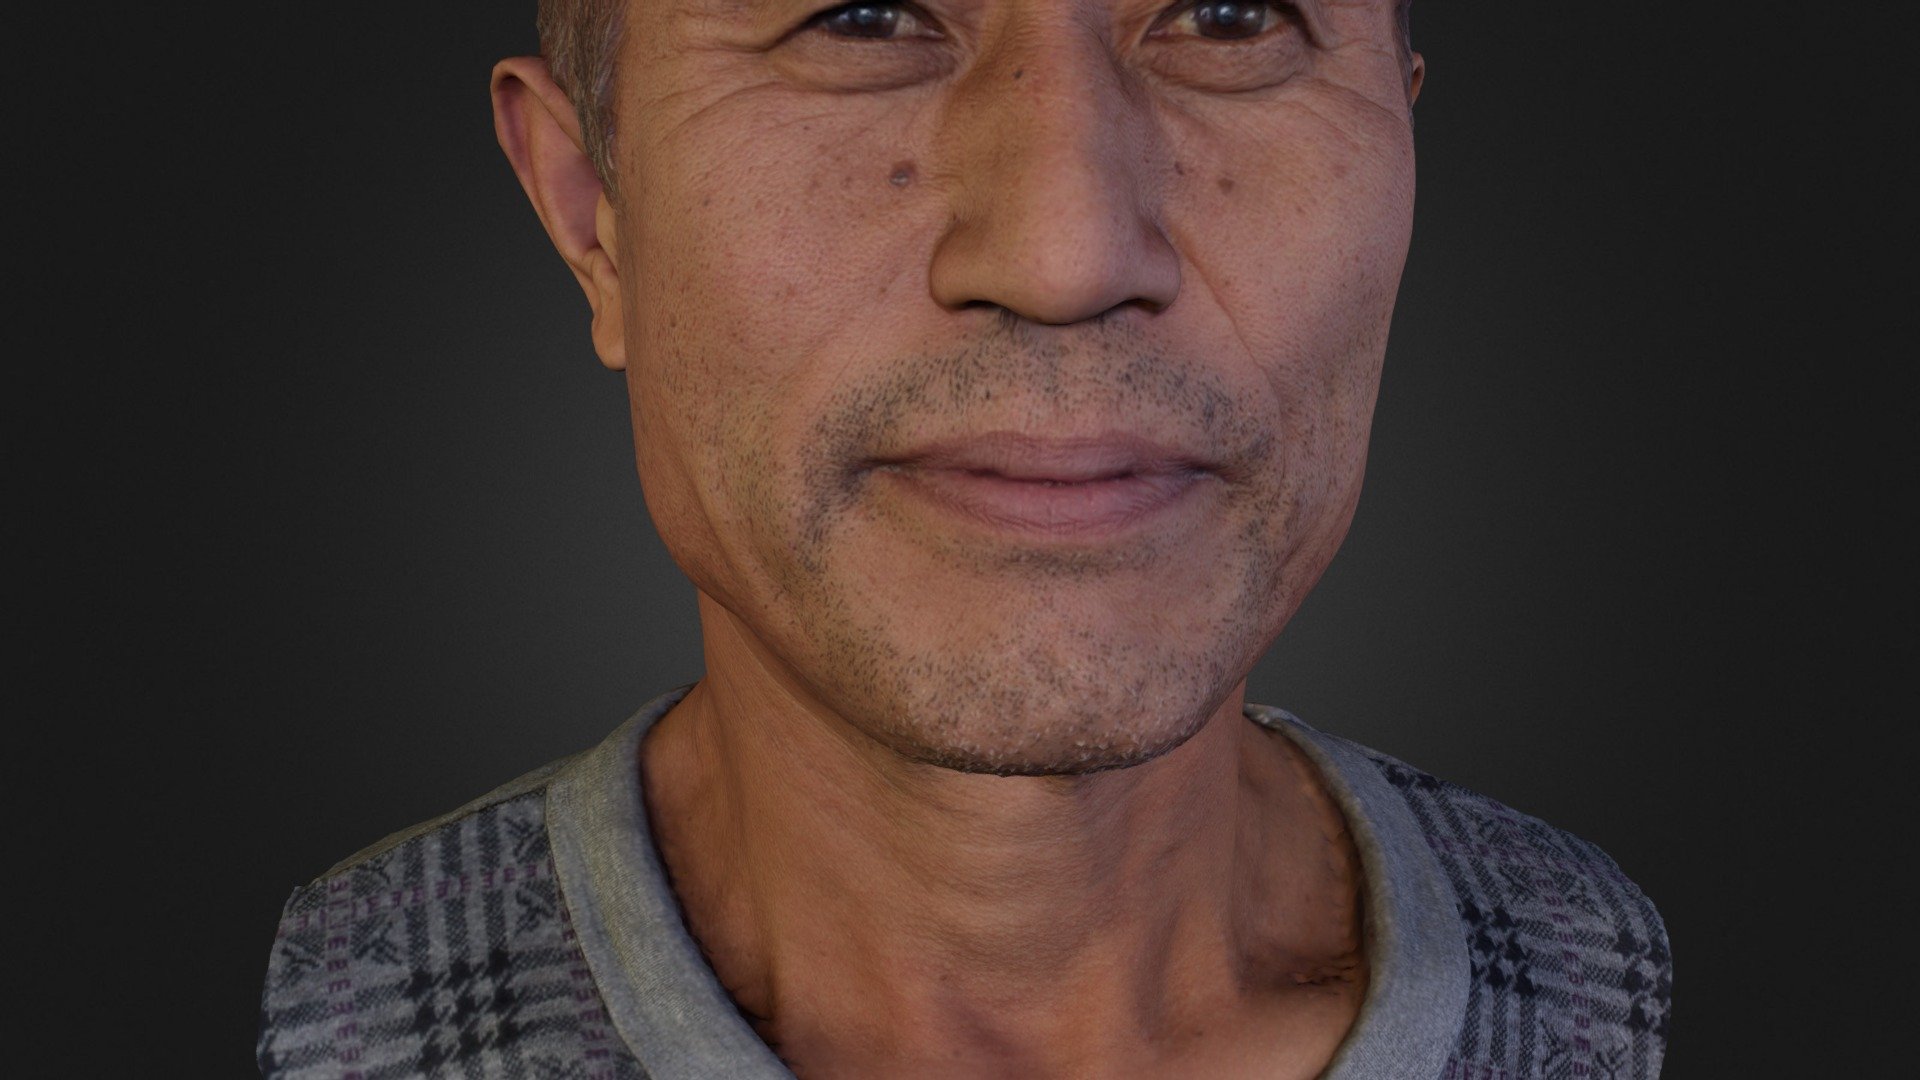 Human face scan

shutter speed : 1/ 10 s 

providing technical support

contact me at dmc@sina.com - Manhead01 - 3D model by amaze3d 3d model